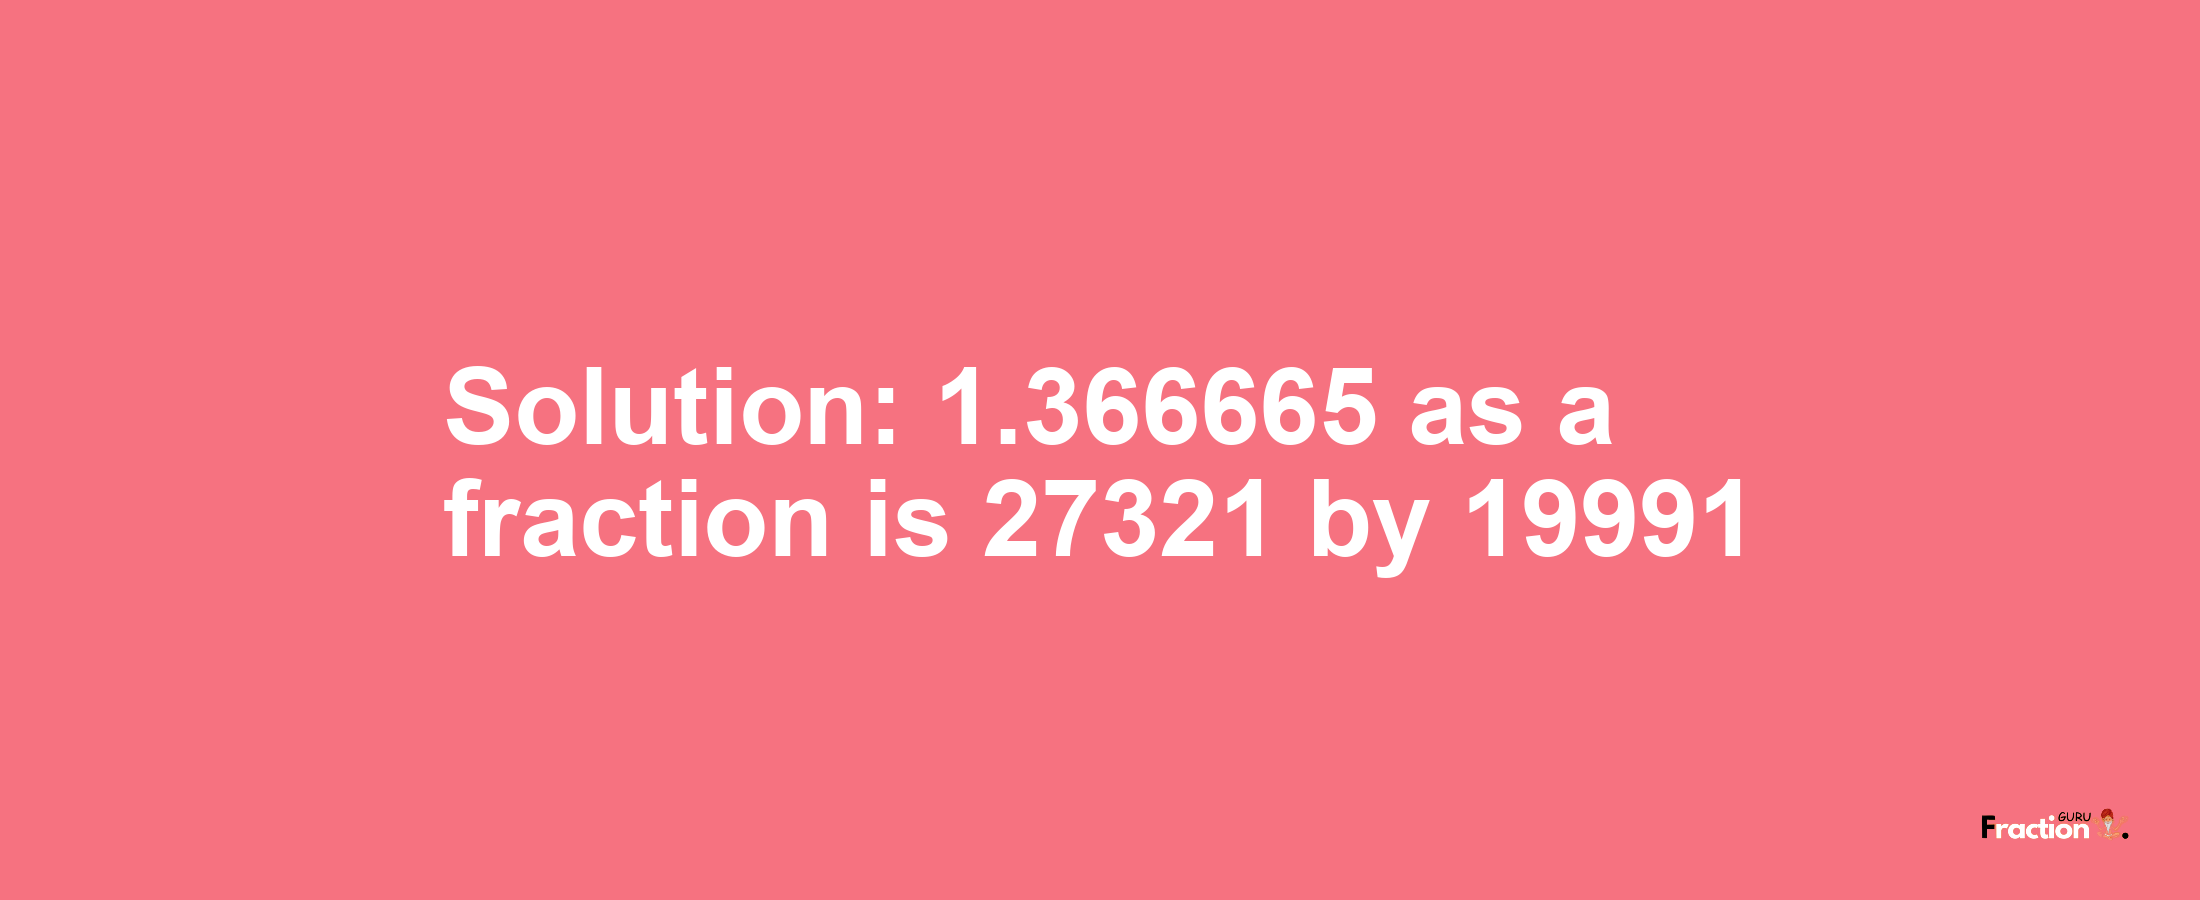 Solution:1.366665 as a fraction is 27321/19991